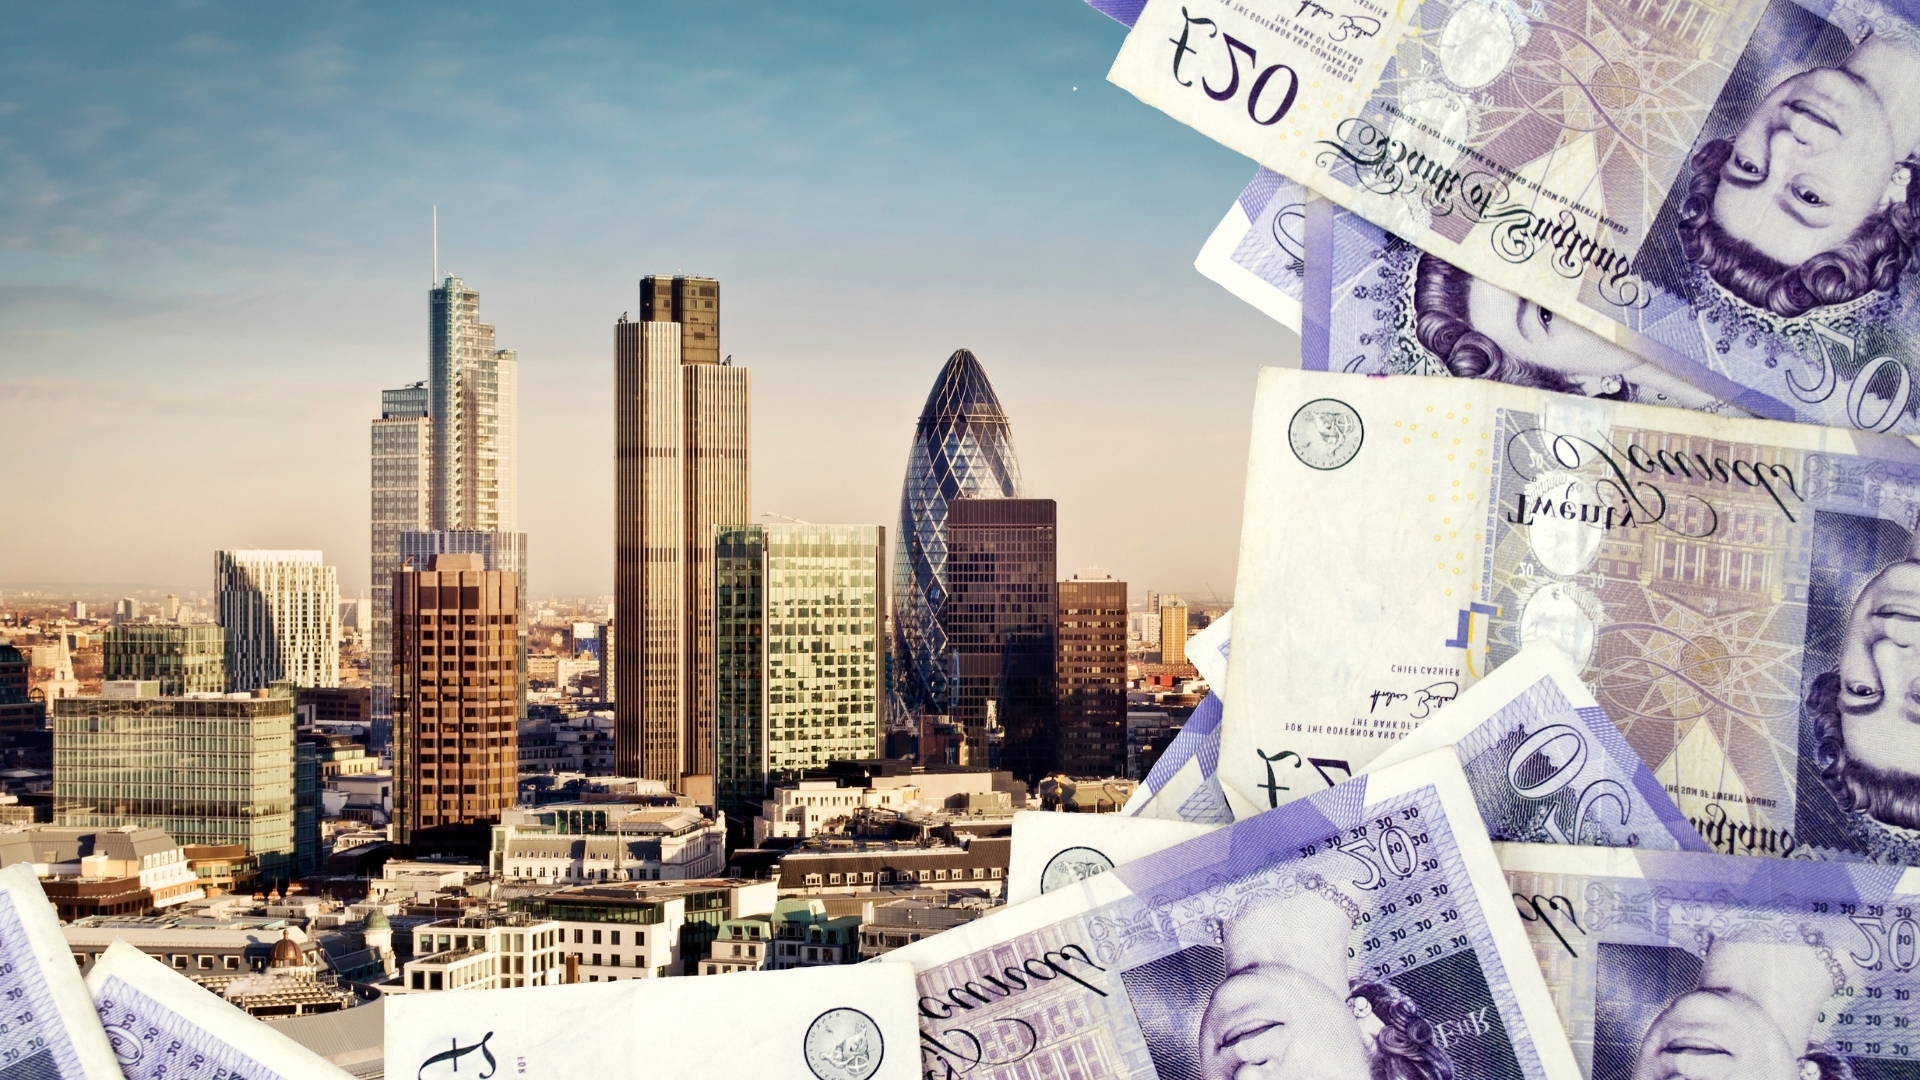 The skyline of London is partially obstructed by pound notes.